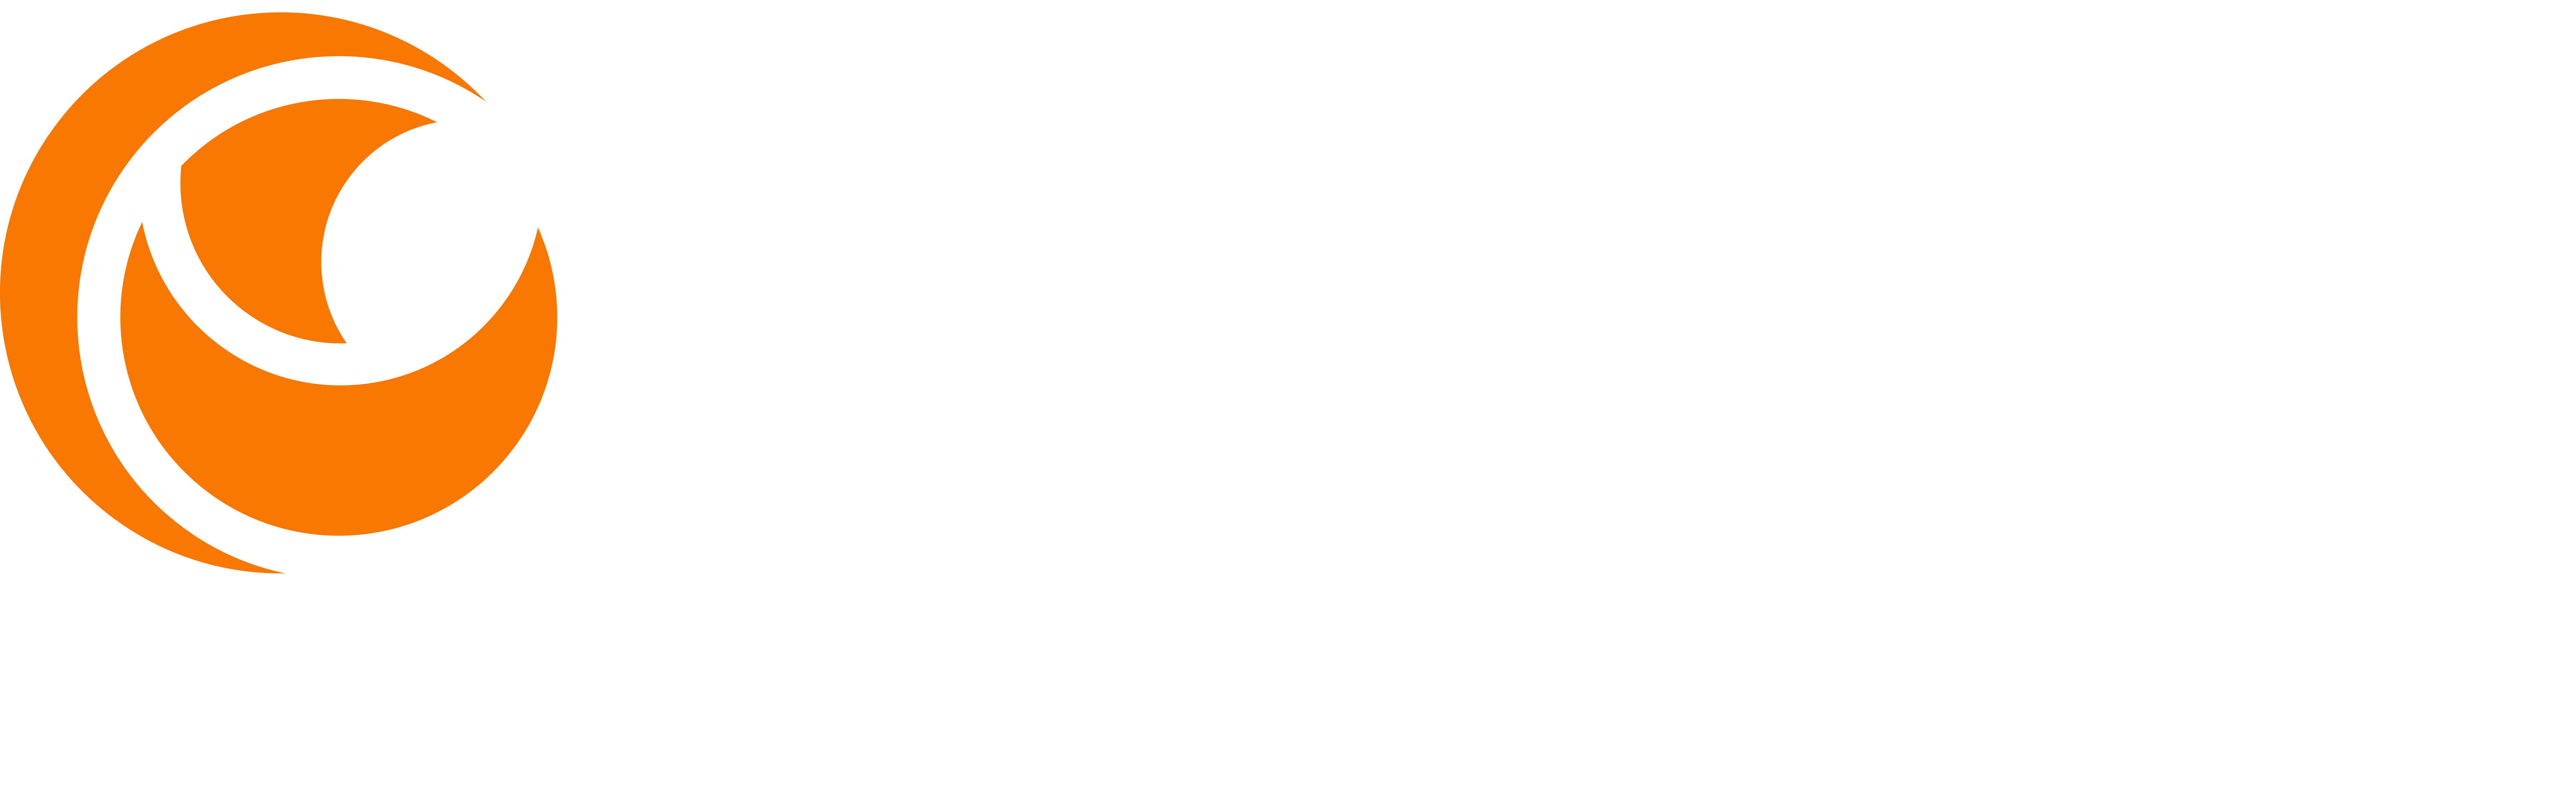 Kwello by Acceleration Point